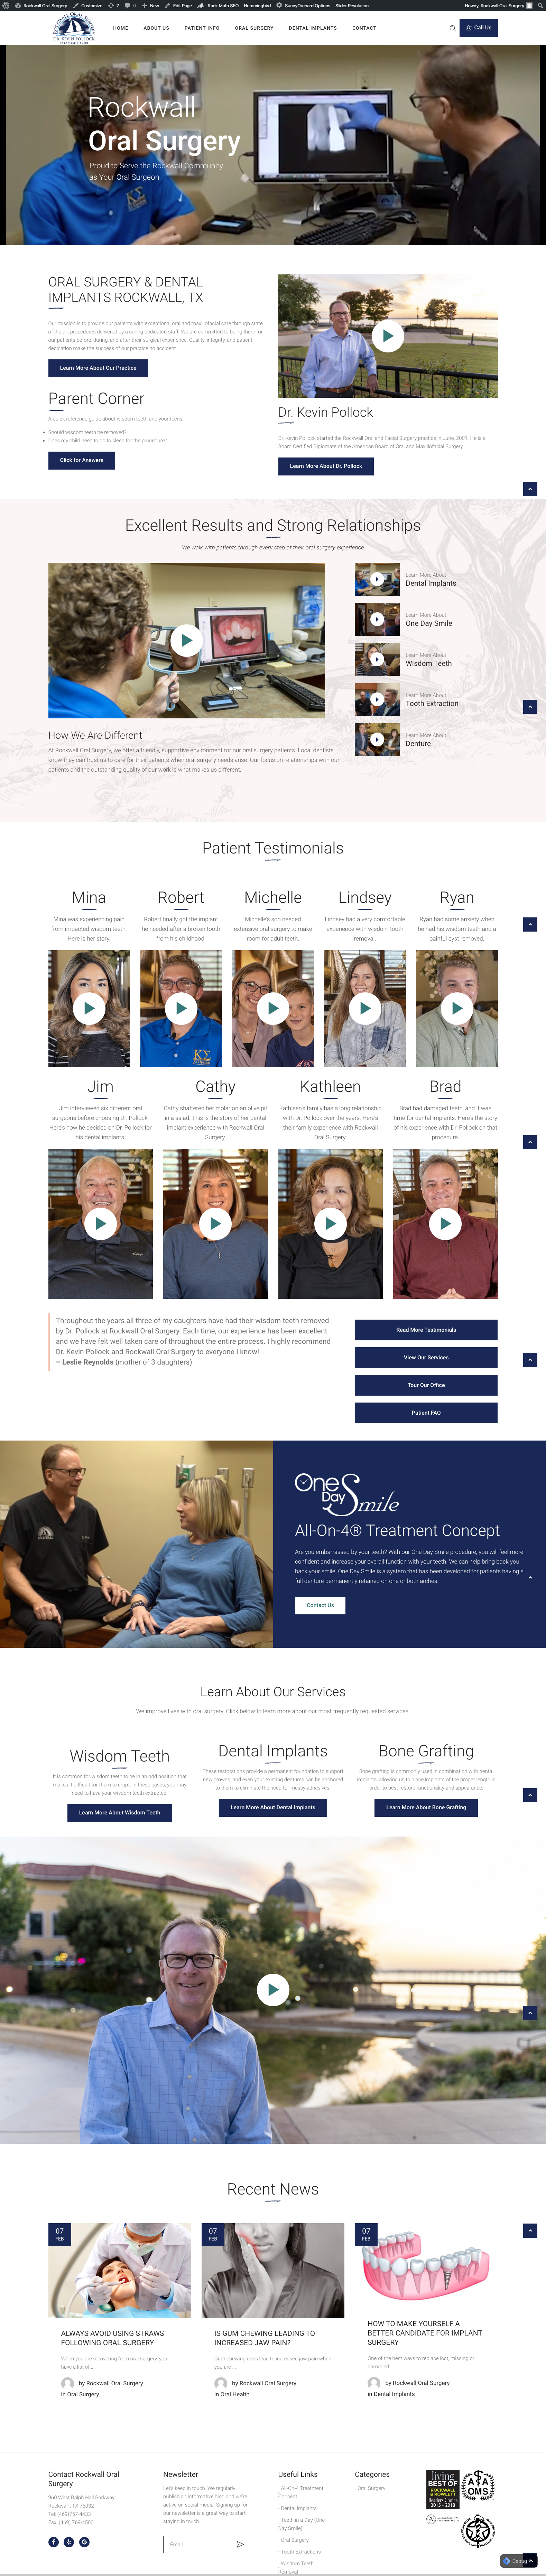 A website design for Rockwall Oral Surgery, a dentist's office.